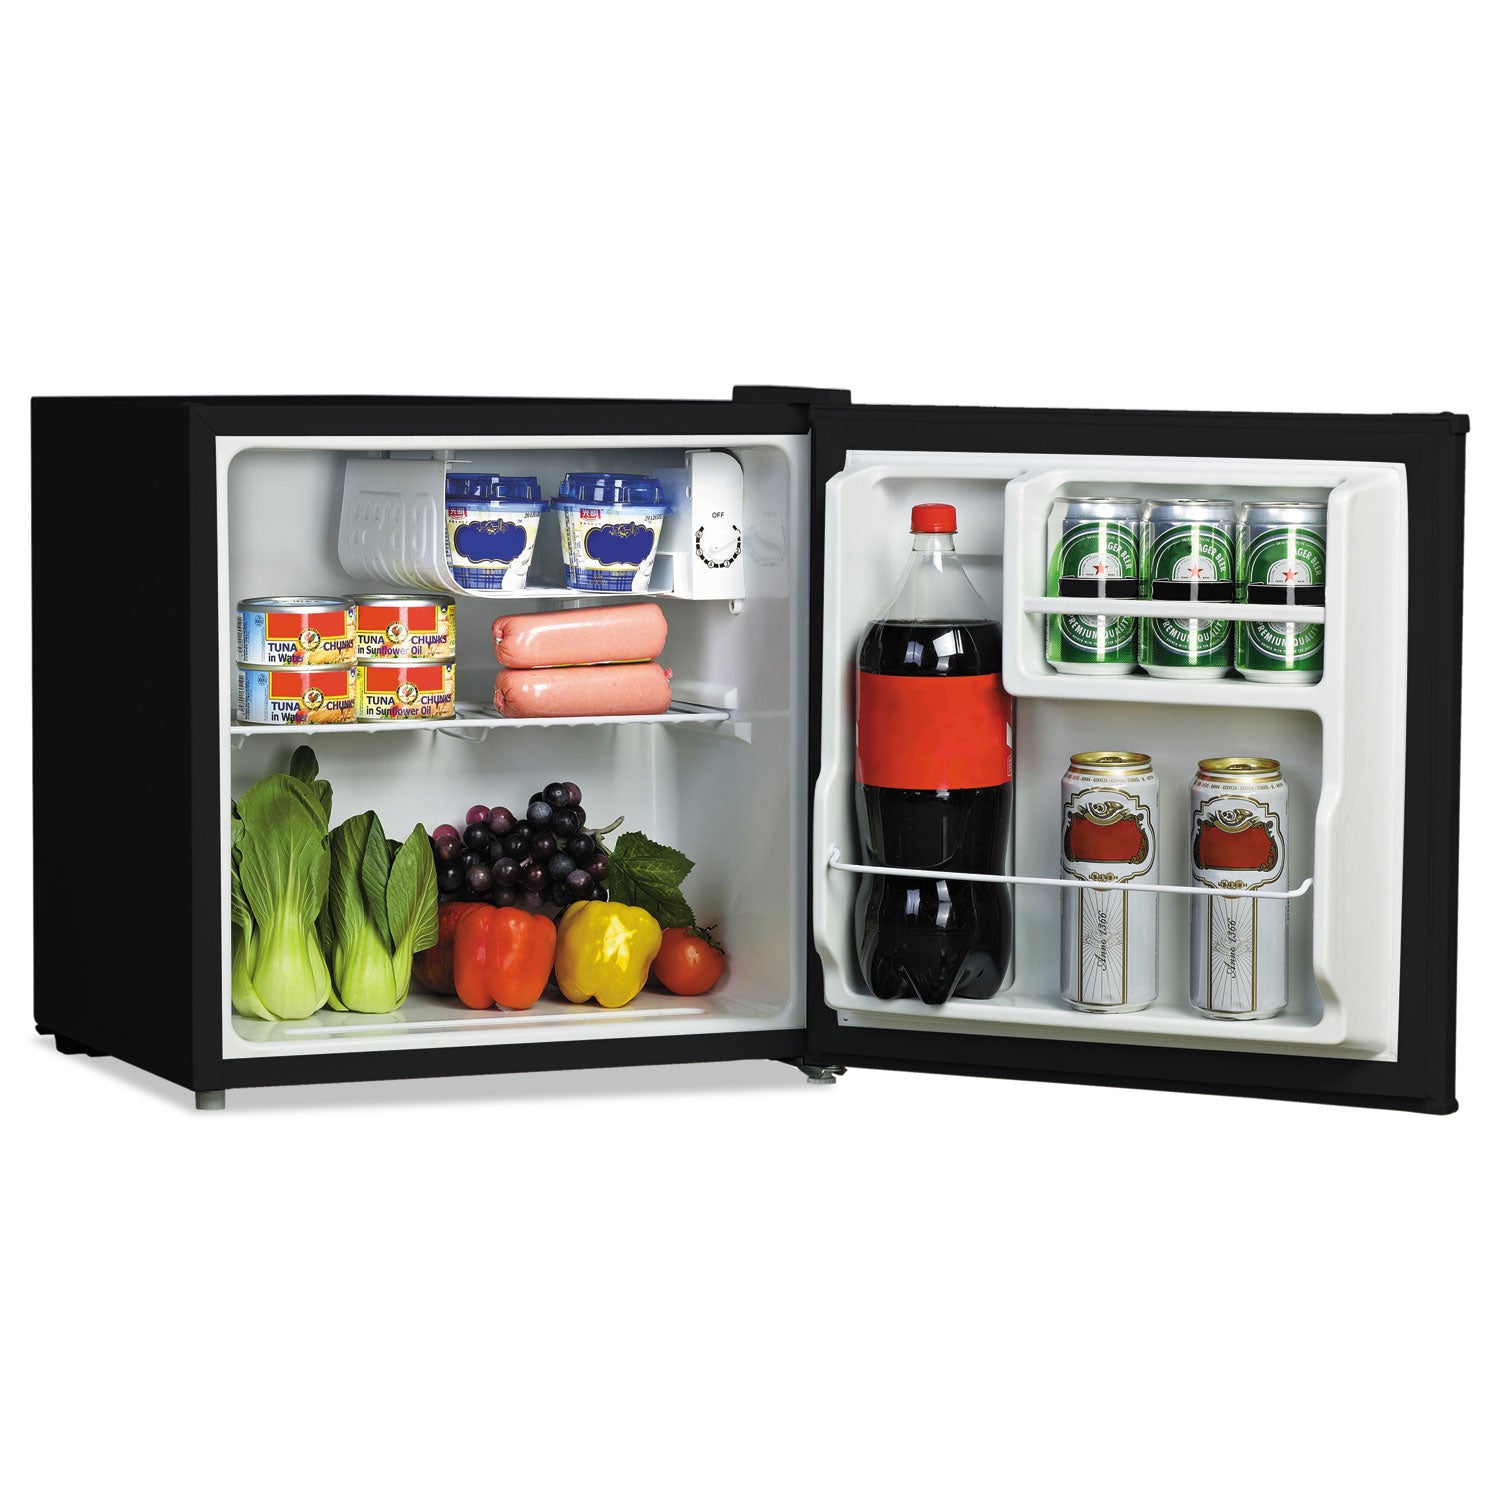 16-cu-ft-refrigerator-with-chiller-compartment-black_alerf616b - 1